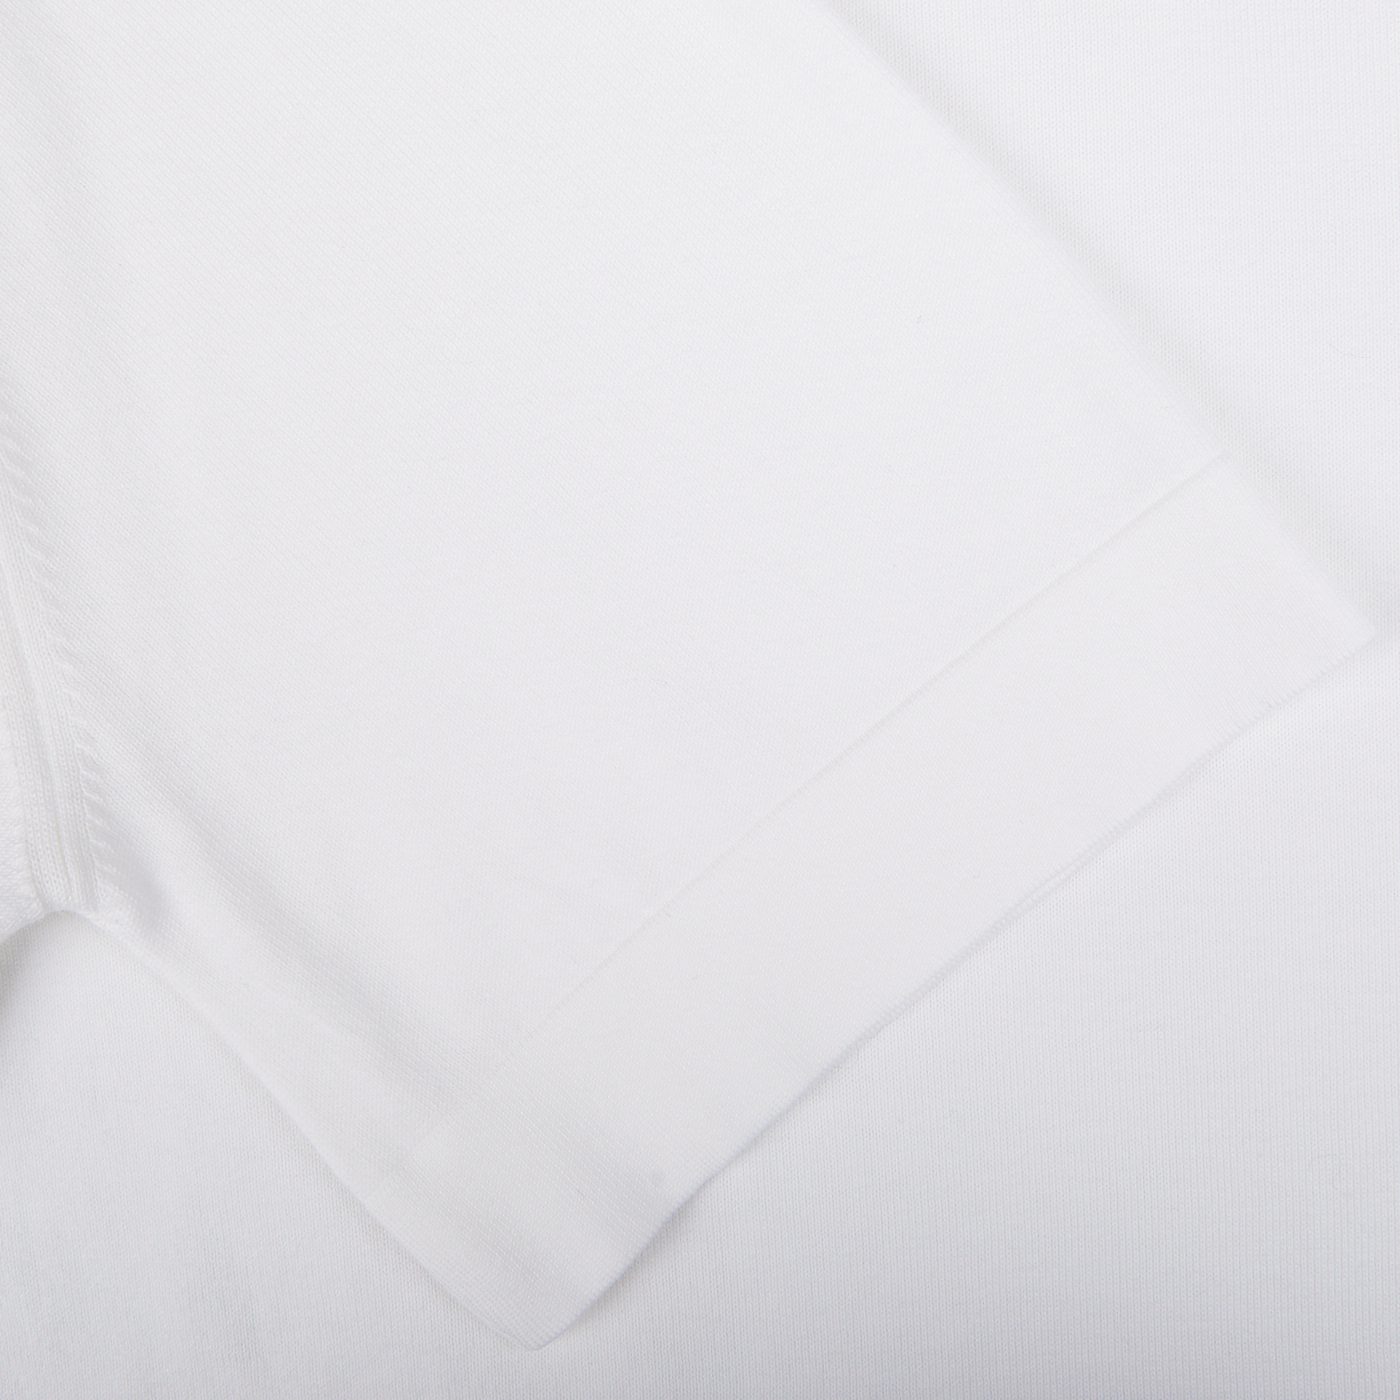 Close-up of a Gran Sasso Off-White Organic Cotton T-shirt fabric texture with a folded edge.